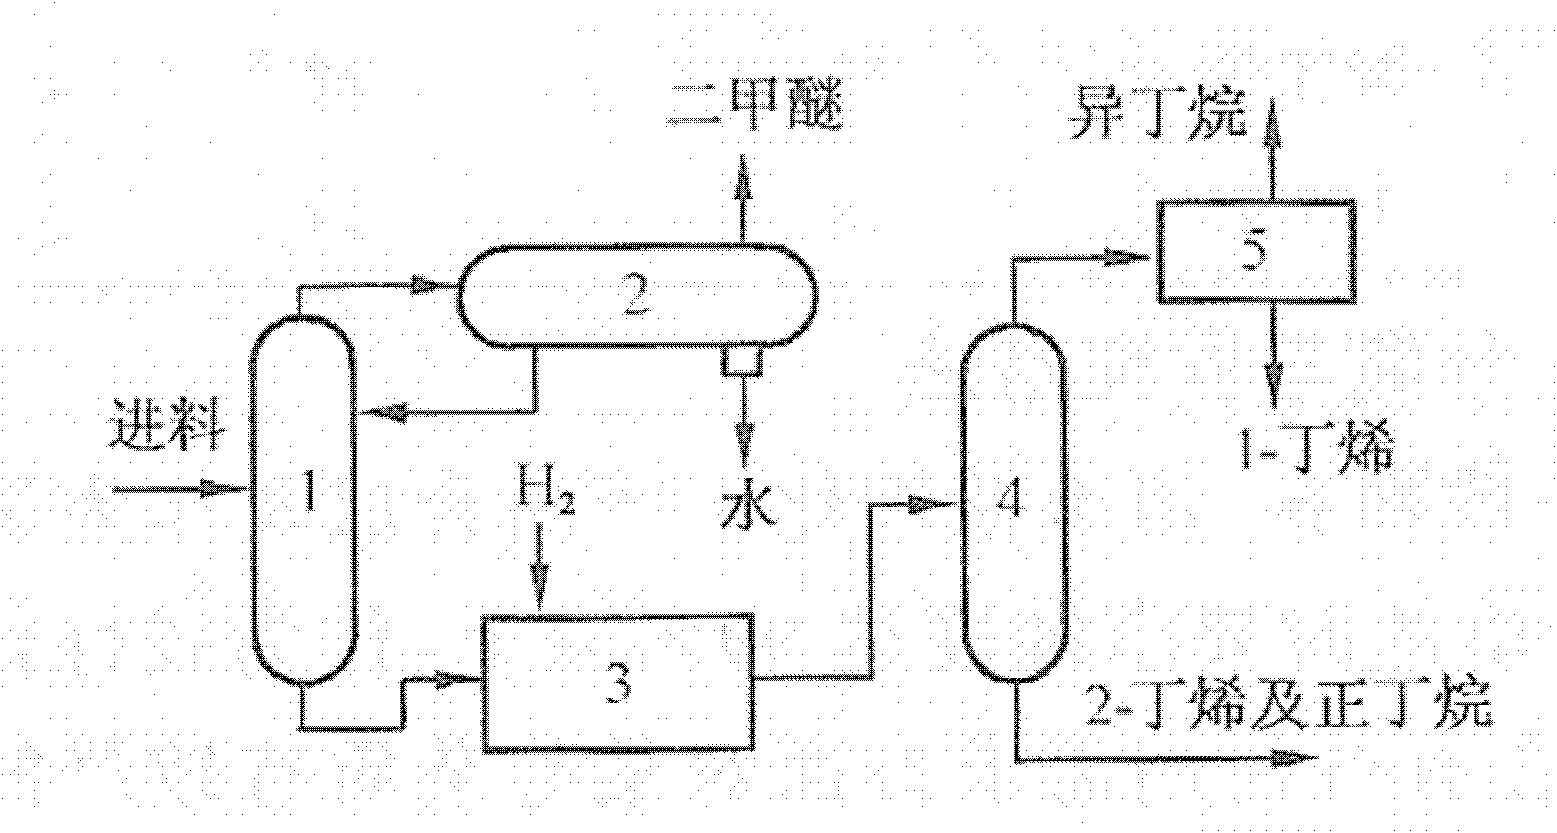 Purification method for butylene by chemical separation process